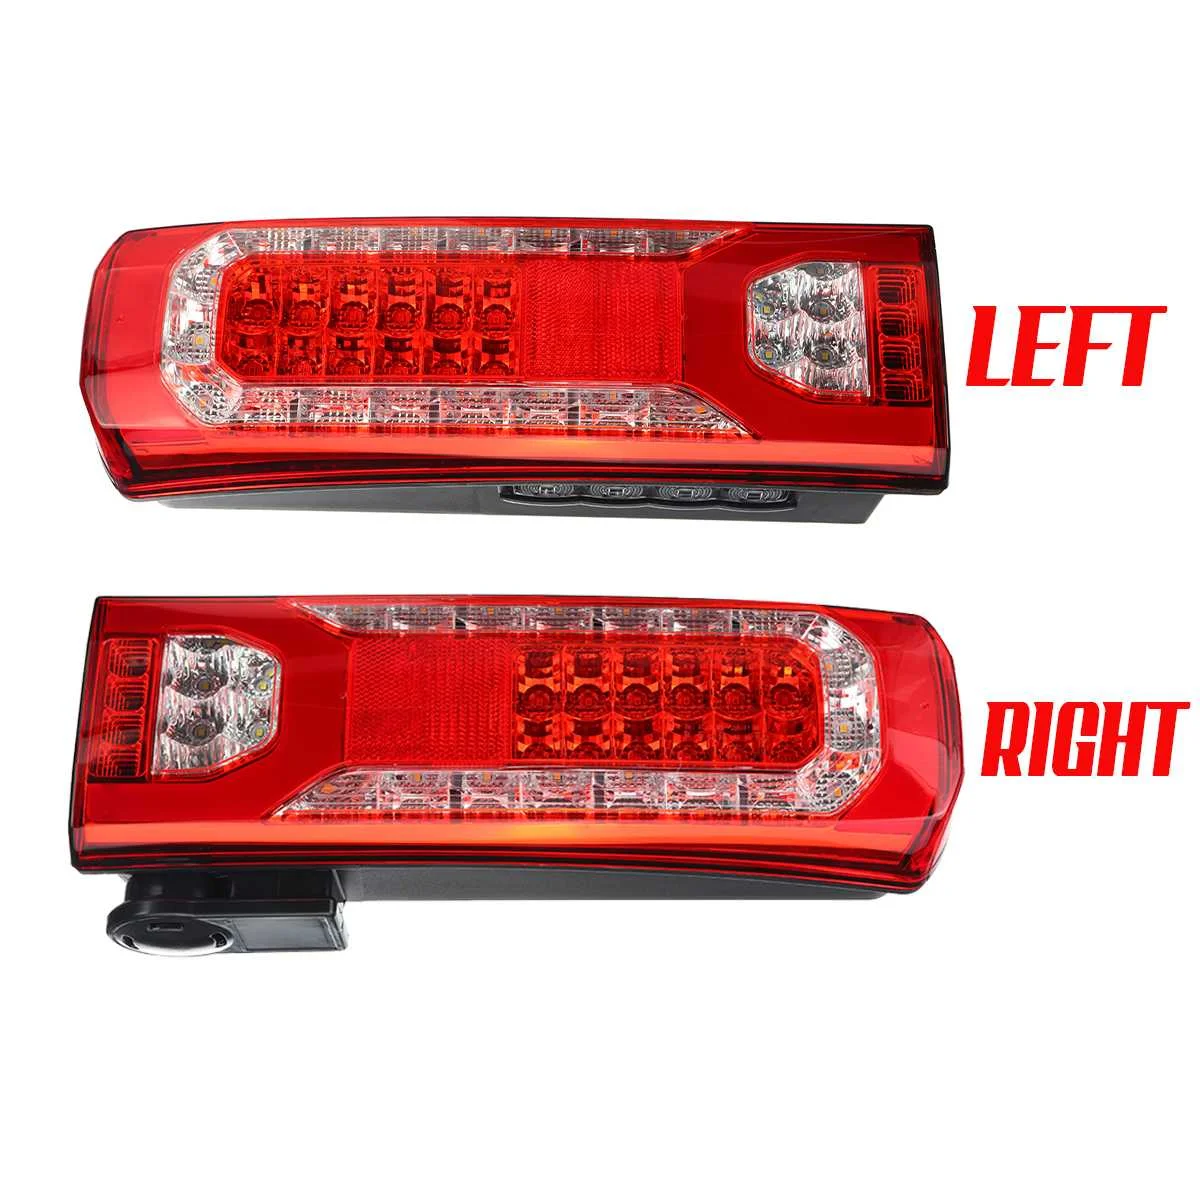 

Left+Right LED Tail Light Taillight For Mercedes For Benz Actros MP4 MP5 Atego Actros Brake Stop Fog Light Turn Signal Lamp